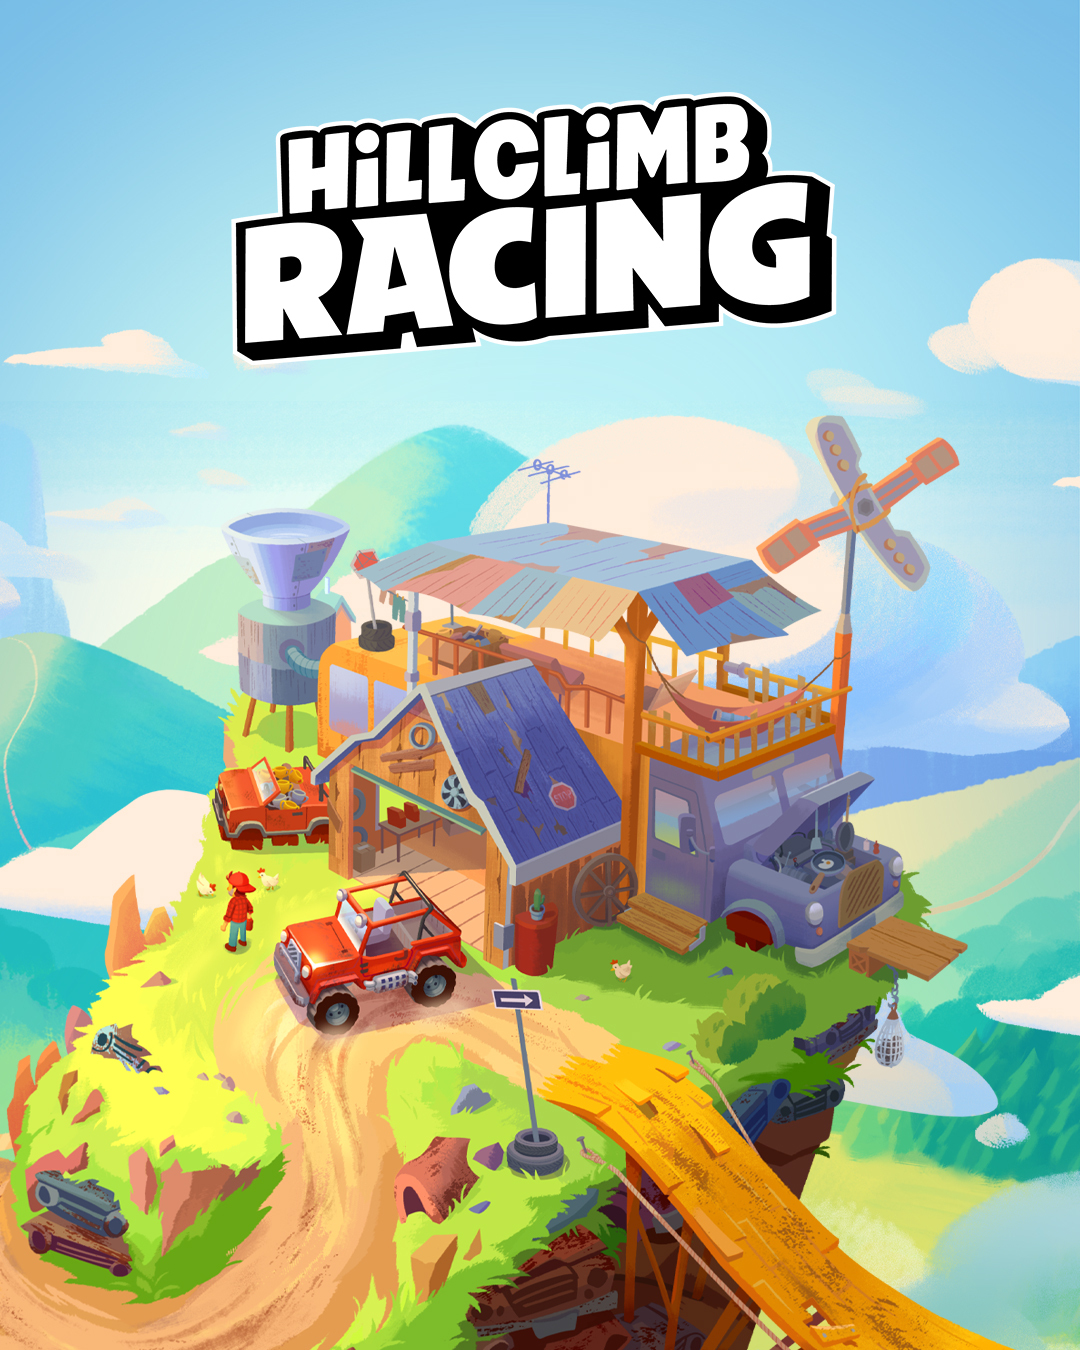 Hill Climb Racing Projects  Photos, videos, logos, illustrations and  branding on Behance